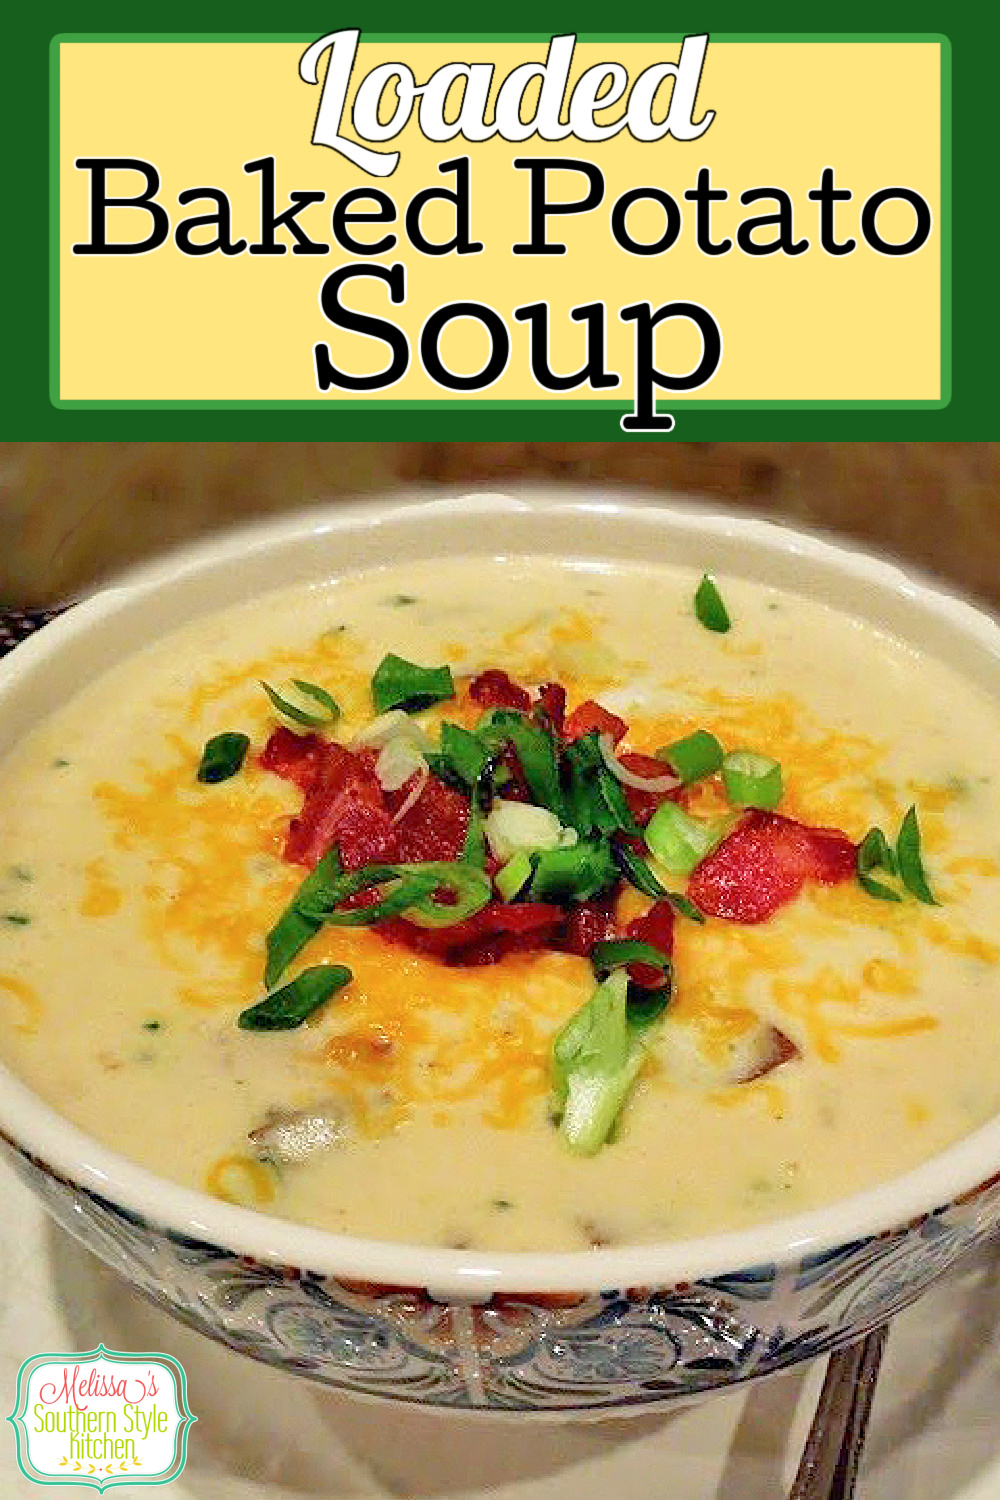 This Loaded Baked Potato Soup is comfort food in a bowl #potatosoup #bakedpotatoes #potatorecipes #dinner #dinnerideas #chese #bacon #loadedbakedpotatoes #loadedpotatosoup #potatosouprecipe #southernfood #southernrecipes via @melissasssk